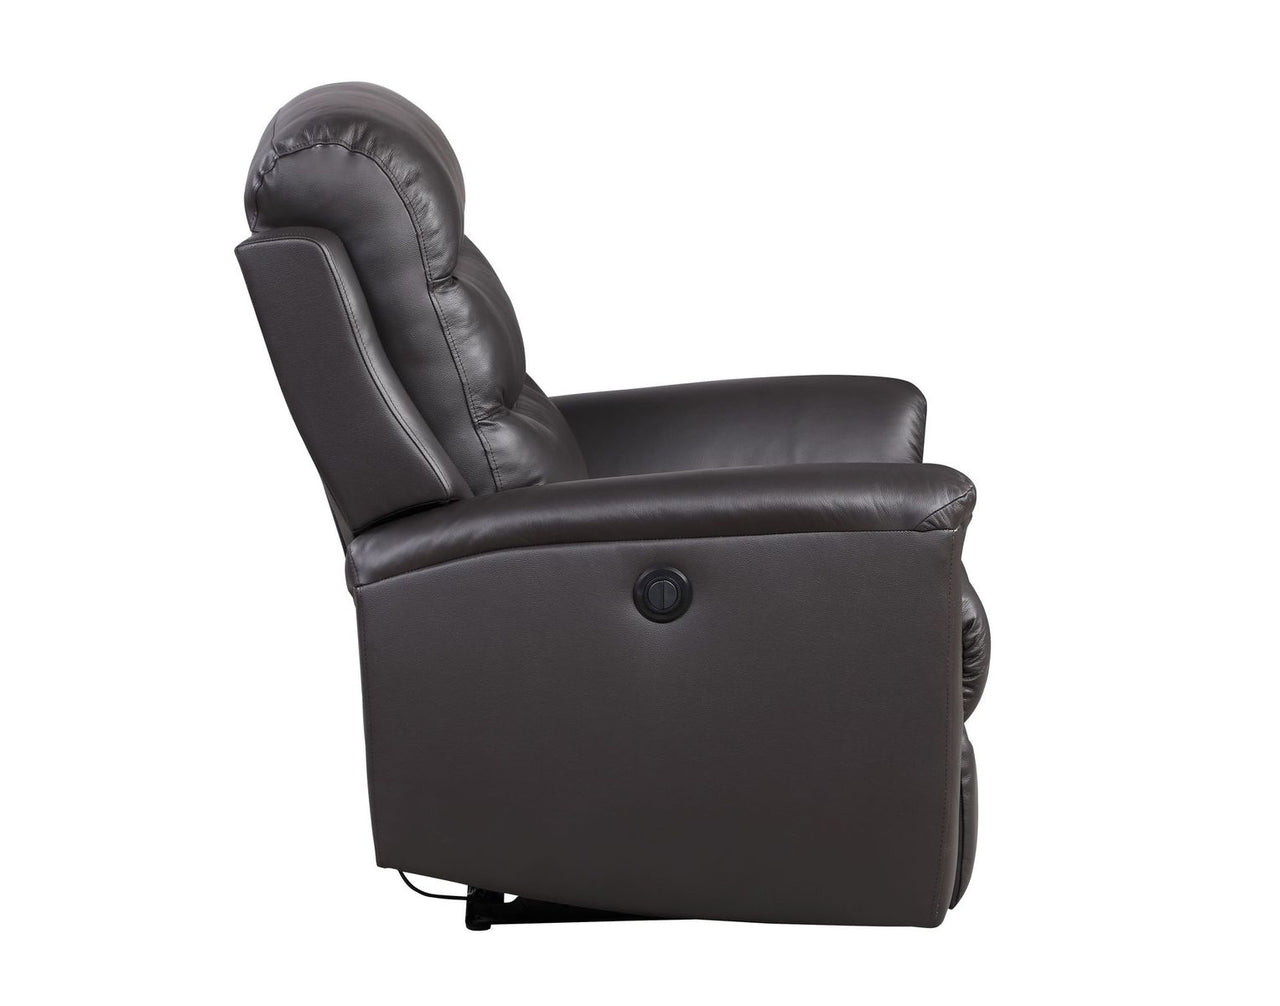 Ava Recliner (Power Motion), Brown Top Grain Leather Match 59693